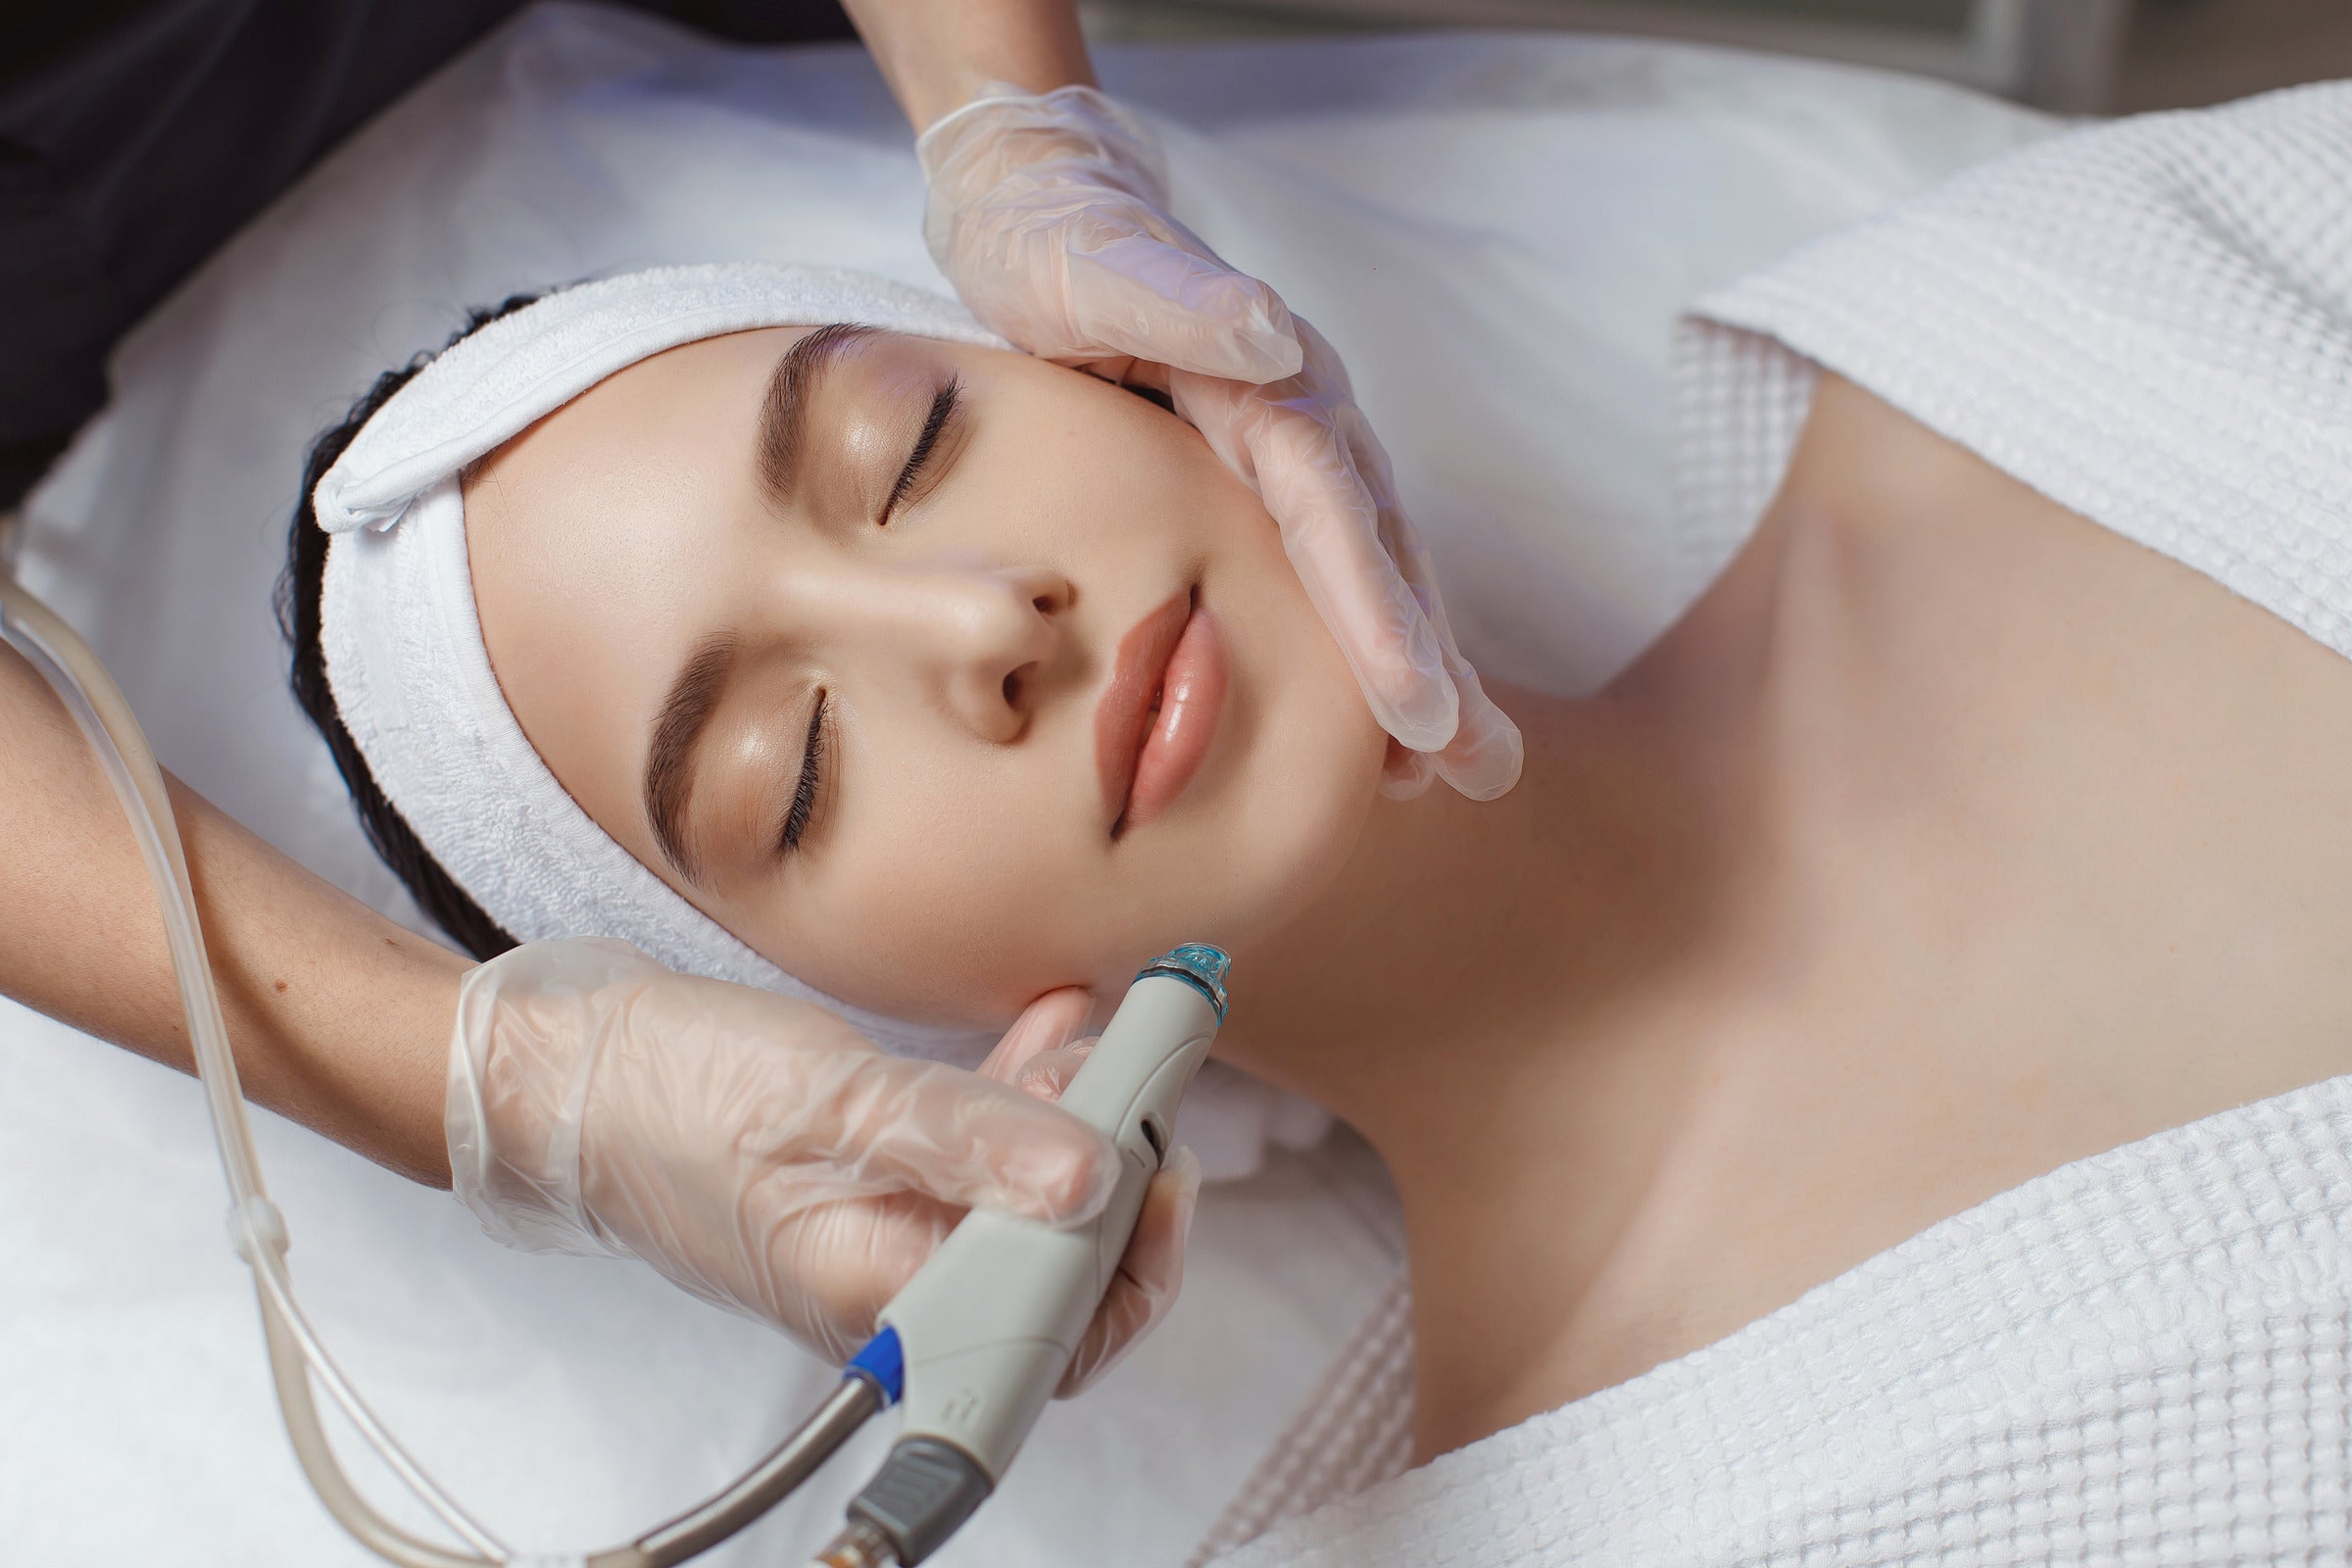 Only the superficial skin layers benefit from microdermabrasion